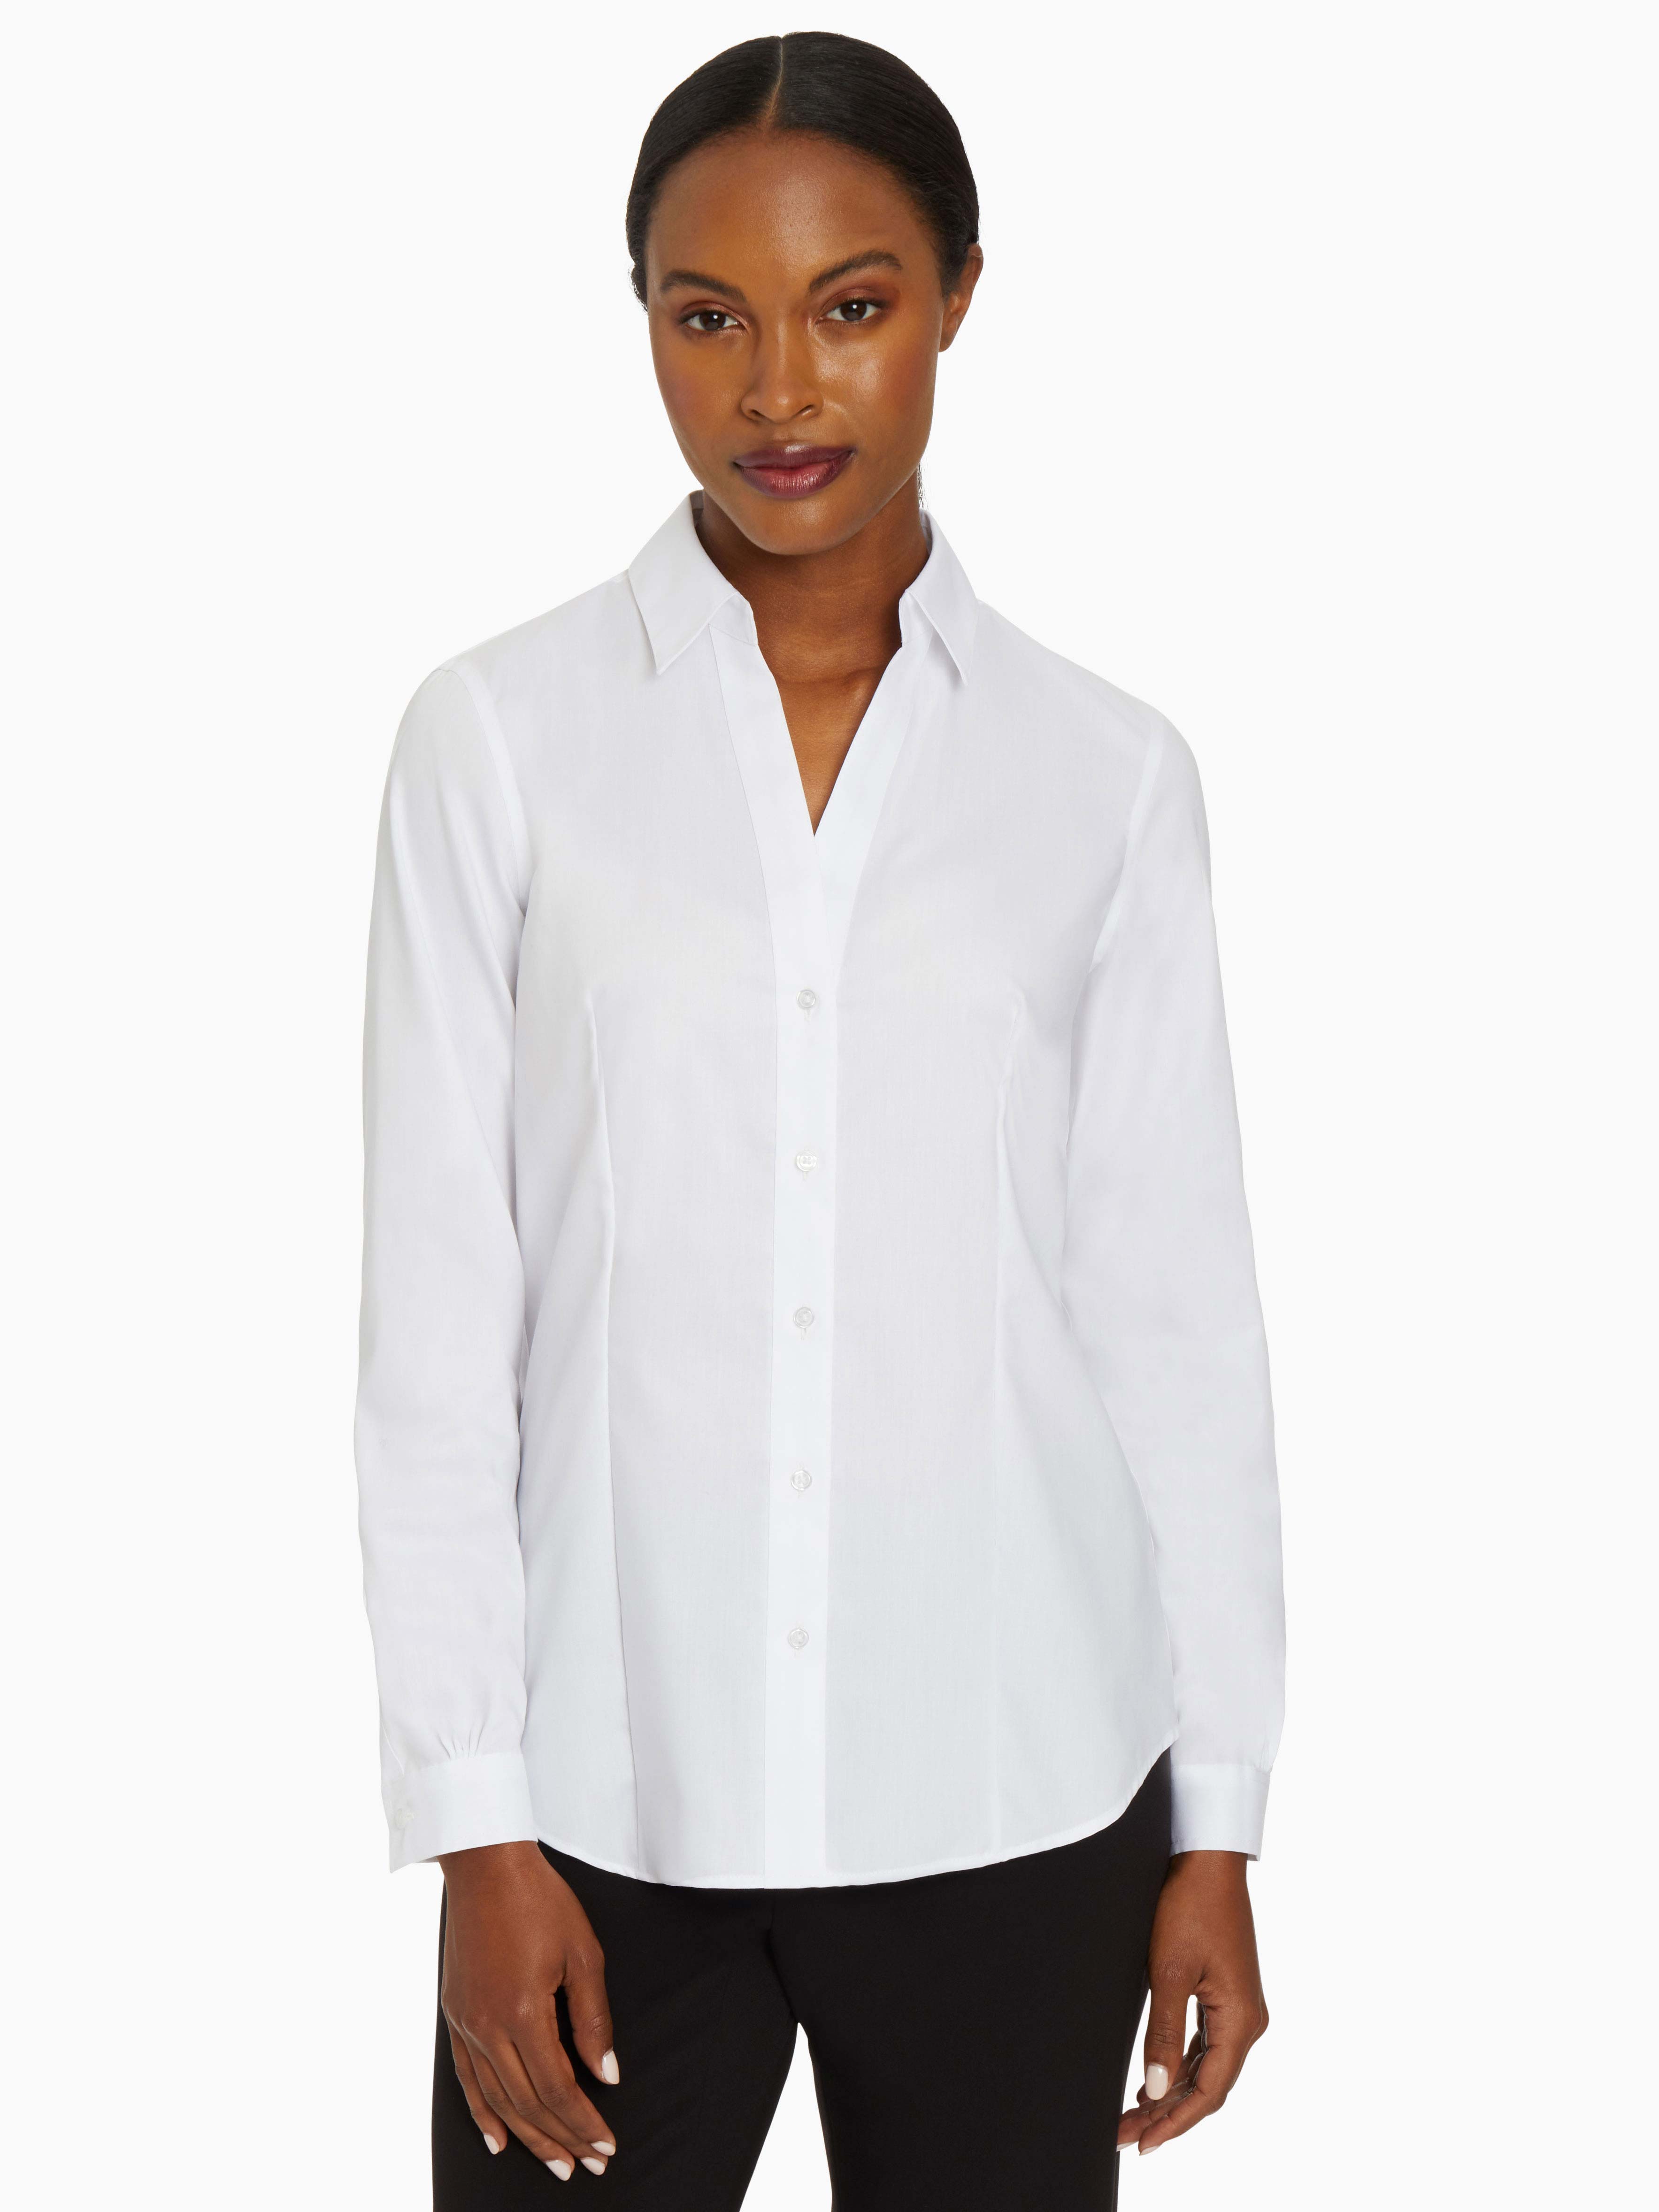 White Easy-Care Shirt - Button Front Shirt